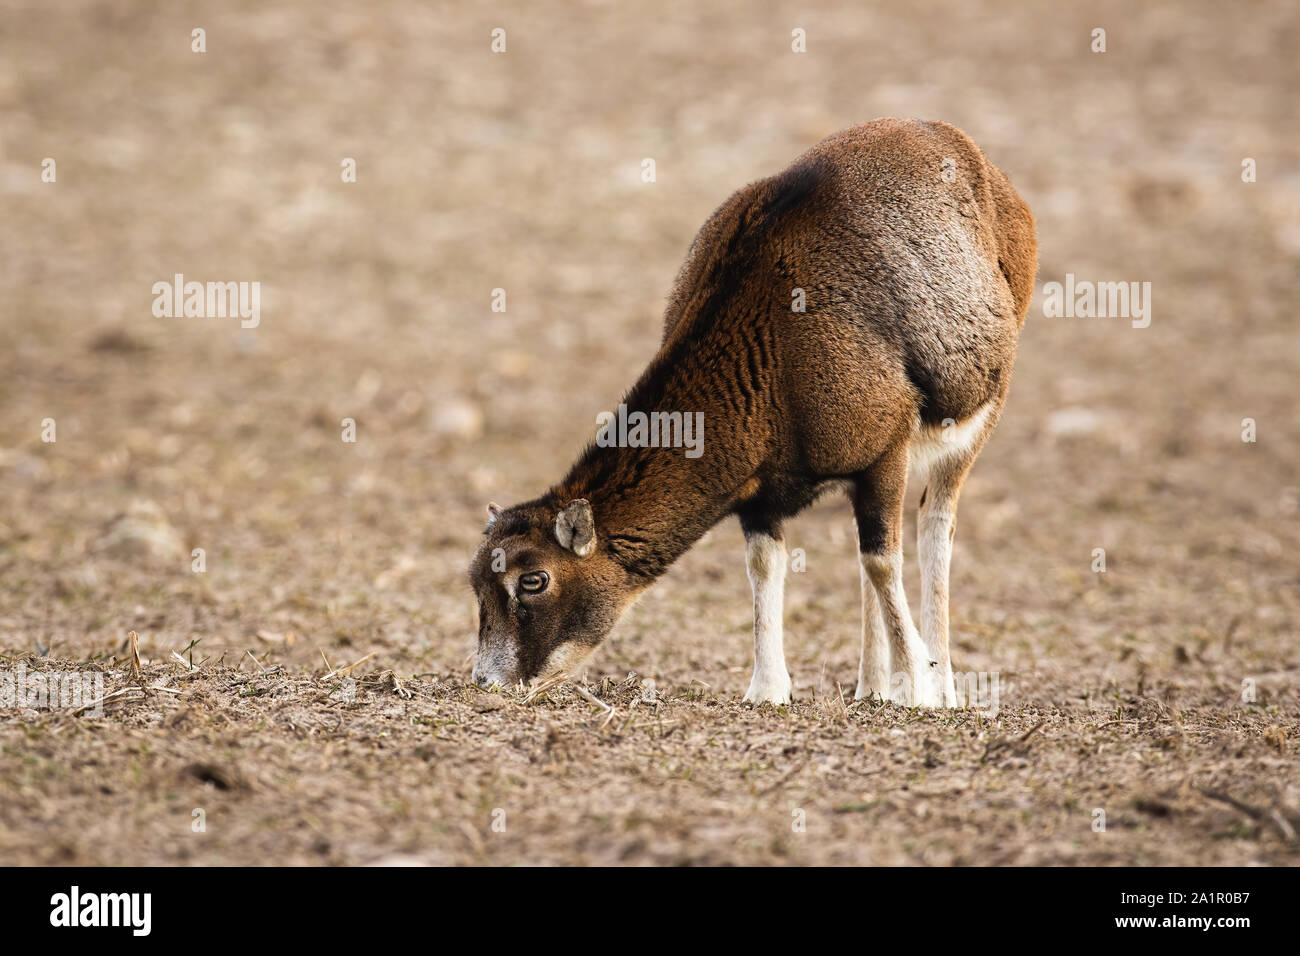 Wild mouflon female sheep grazing on a field with short dry grass in winter Stock Photo